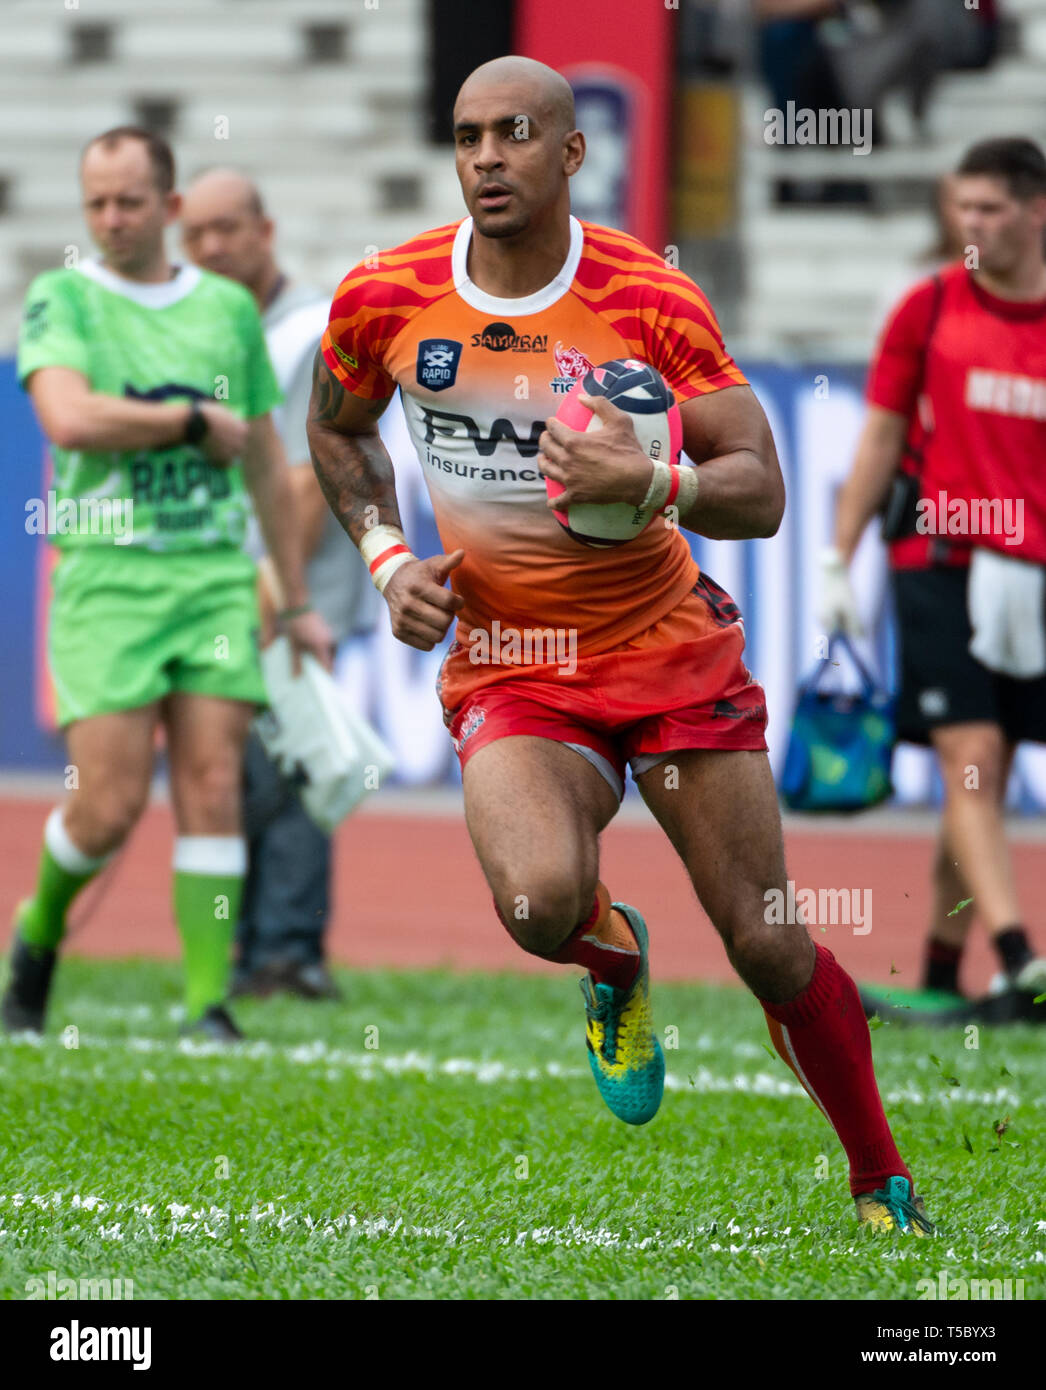 Global Rapid Rugby at Aberdeen Sports Ground Hong Kong. FWD South China Tigers win against the Asia Pacific Dragons Stock Photo